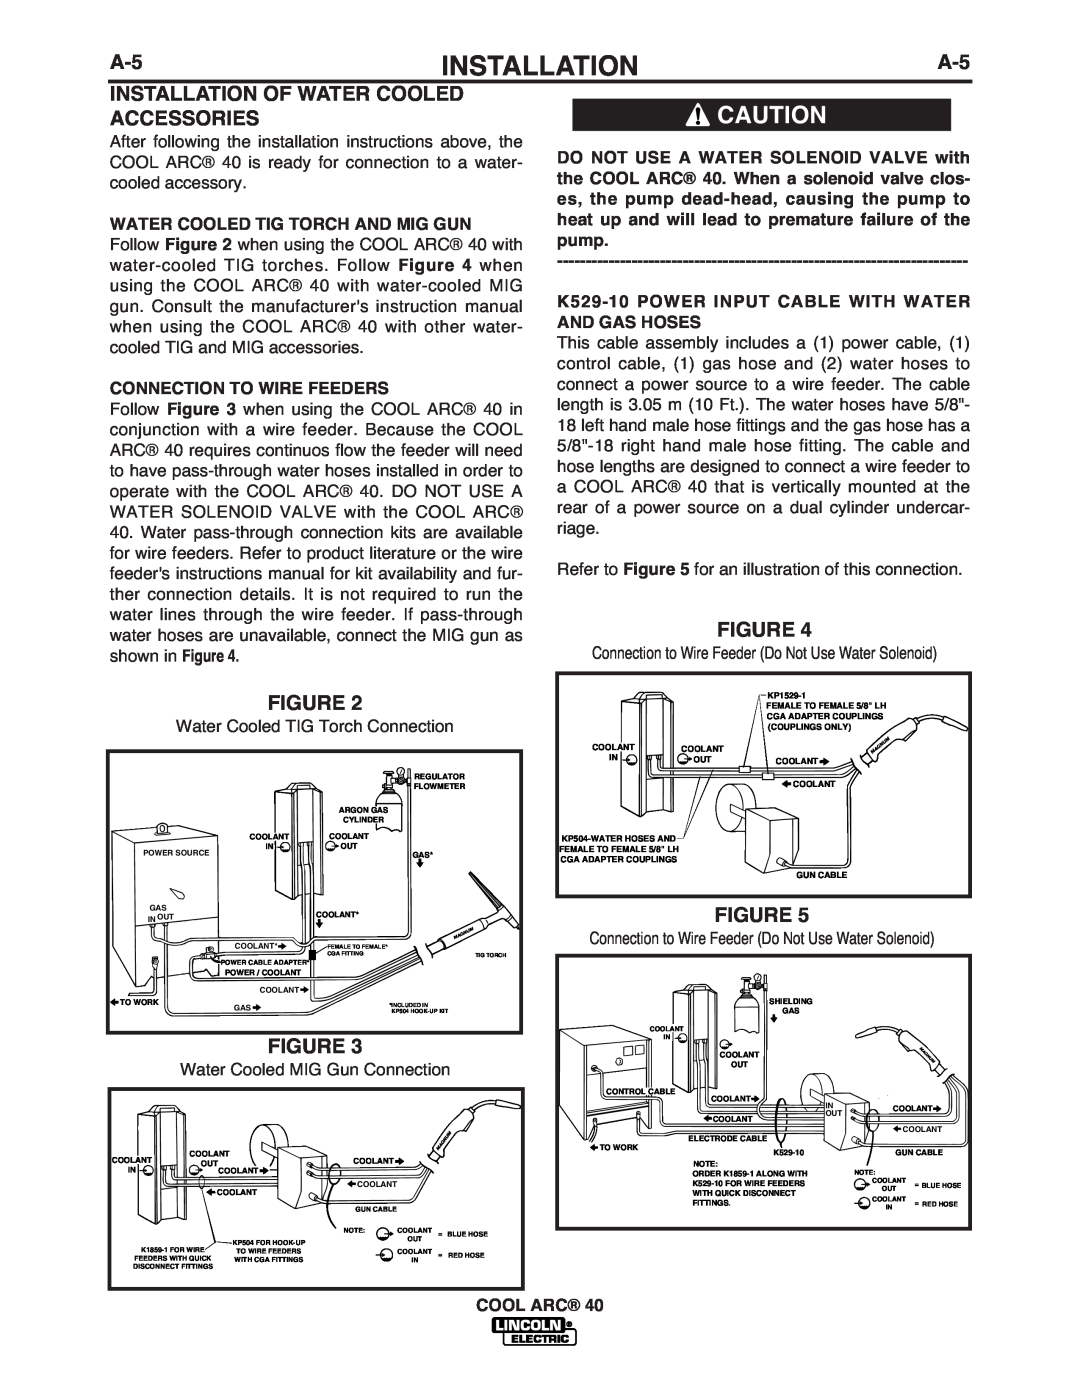 Lincoln Electric IM911 manual Installation Of Water Cooled Accessories, Connection To Wire Feeders, Cool Arc 